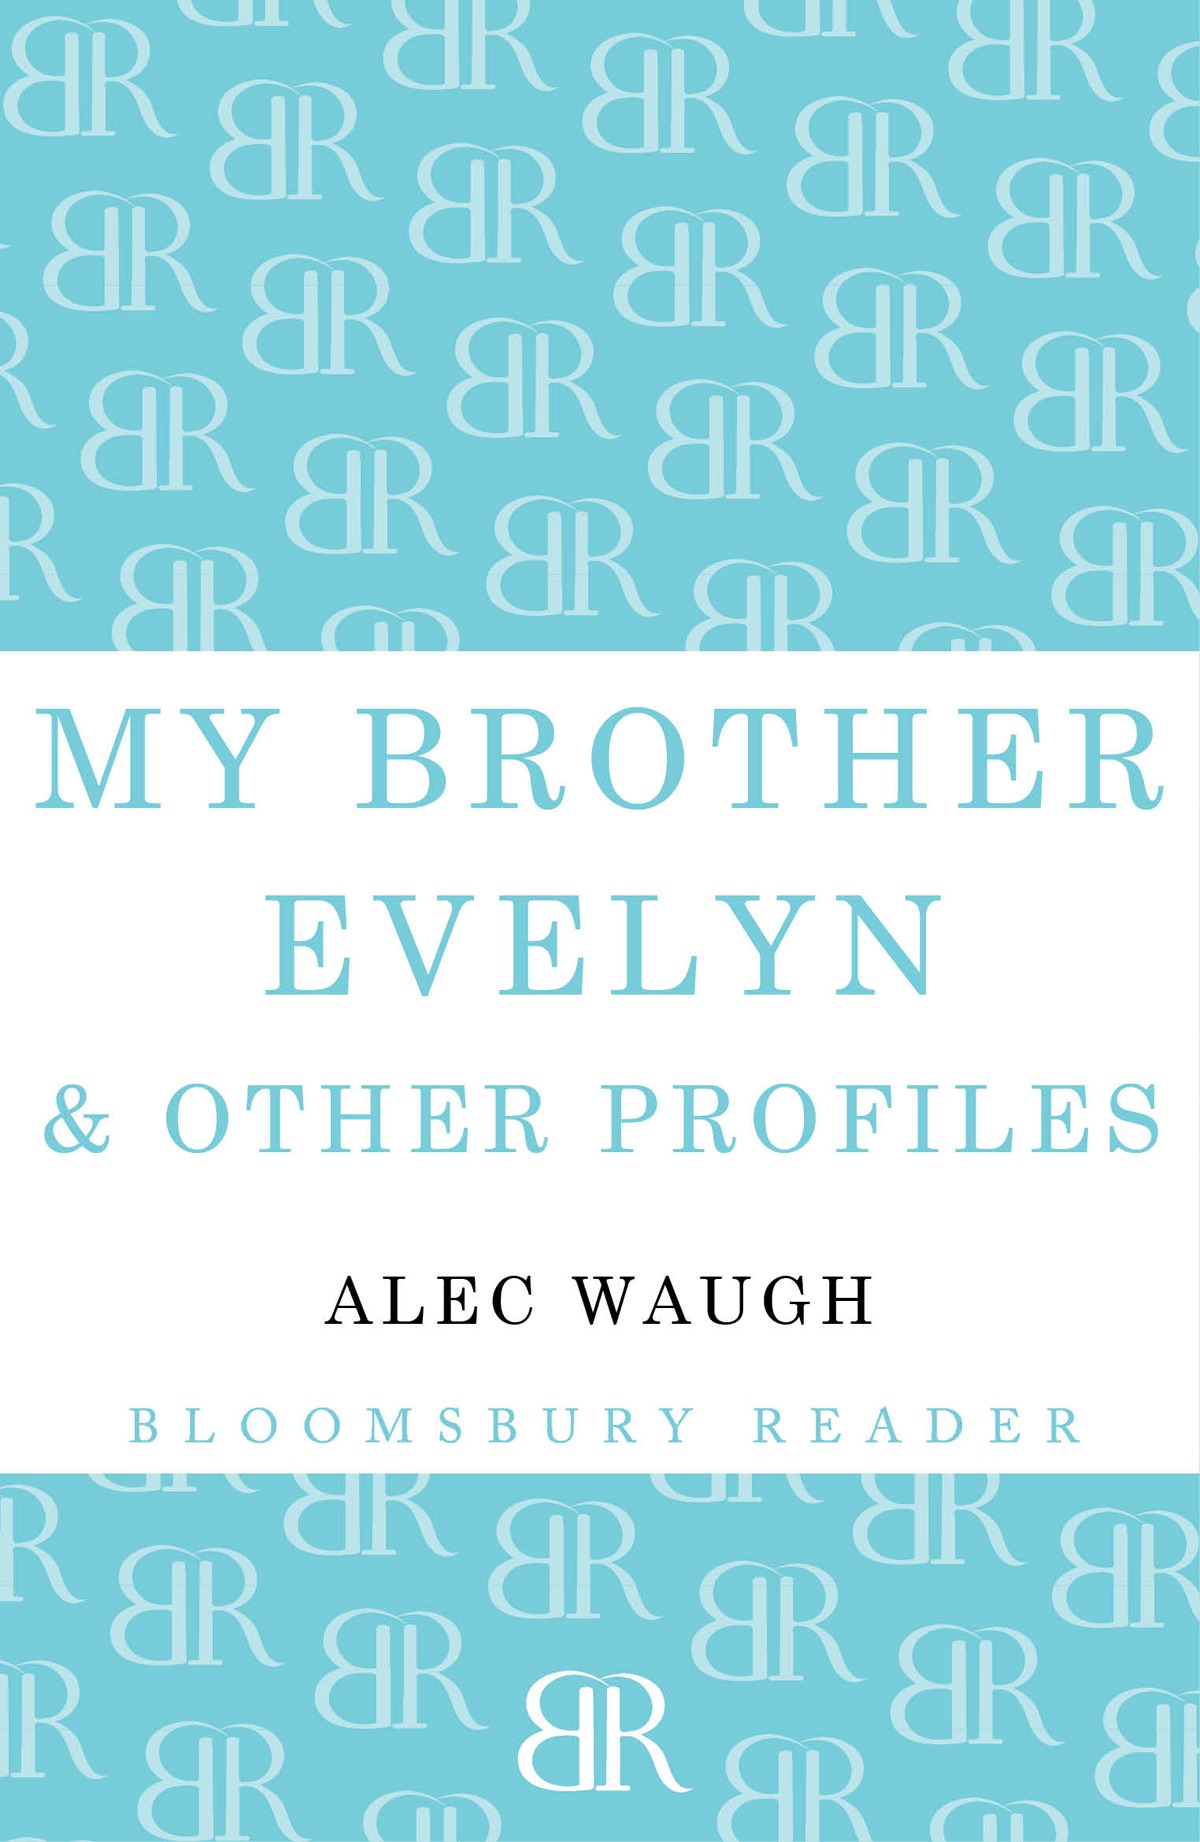 My Brother Evelyn & Other Profiles (1967)